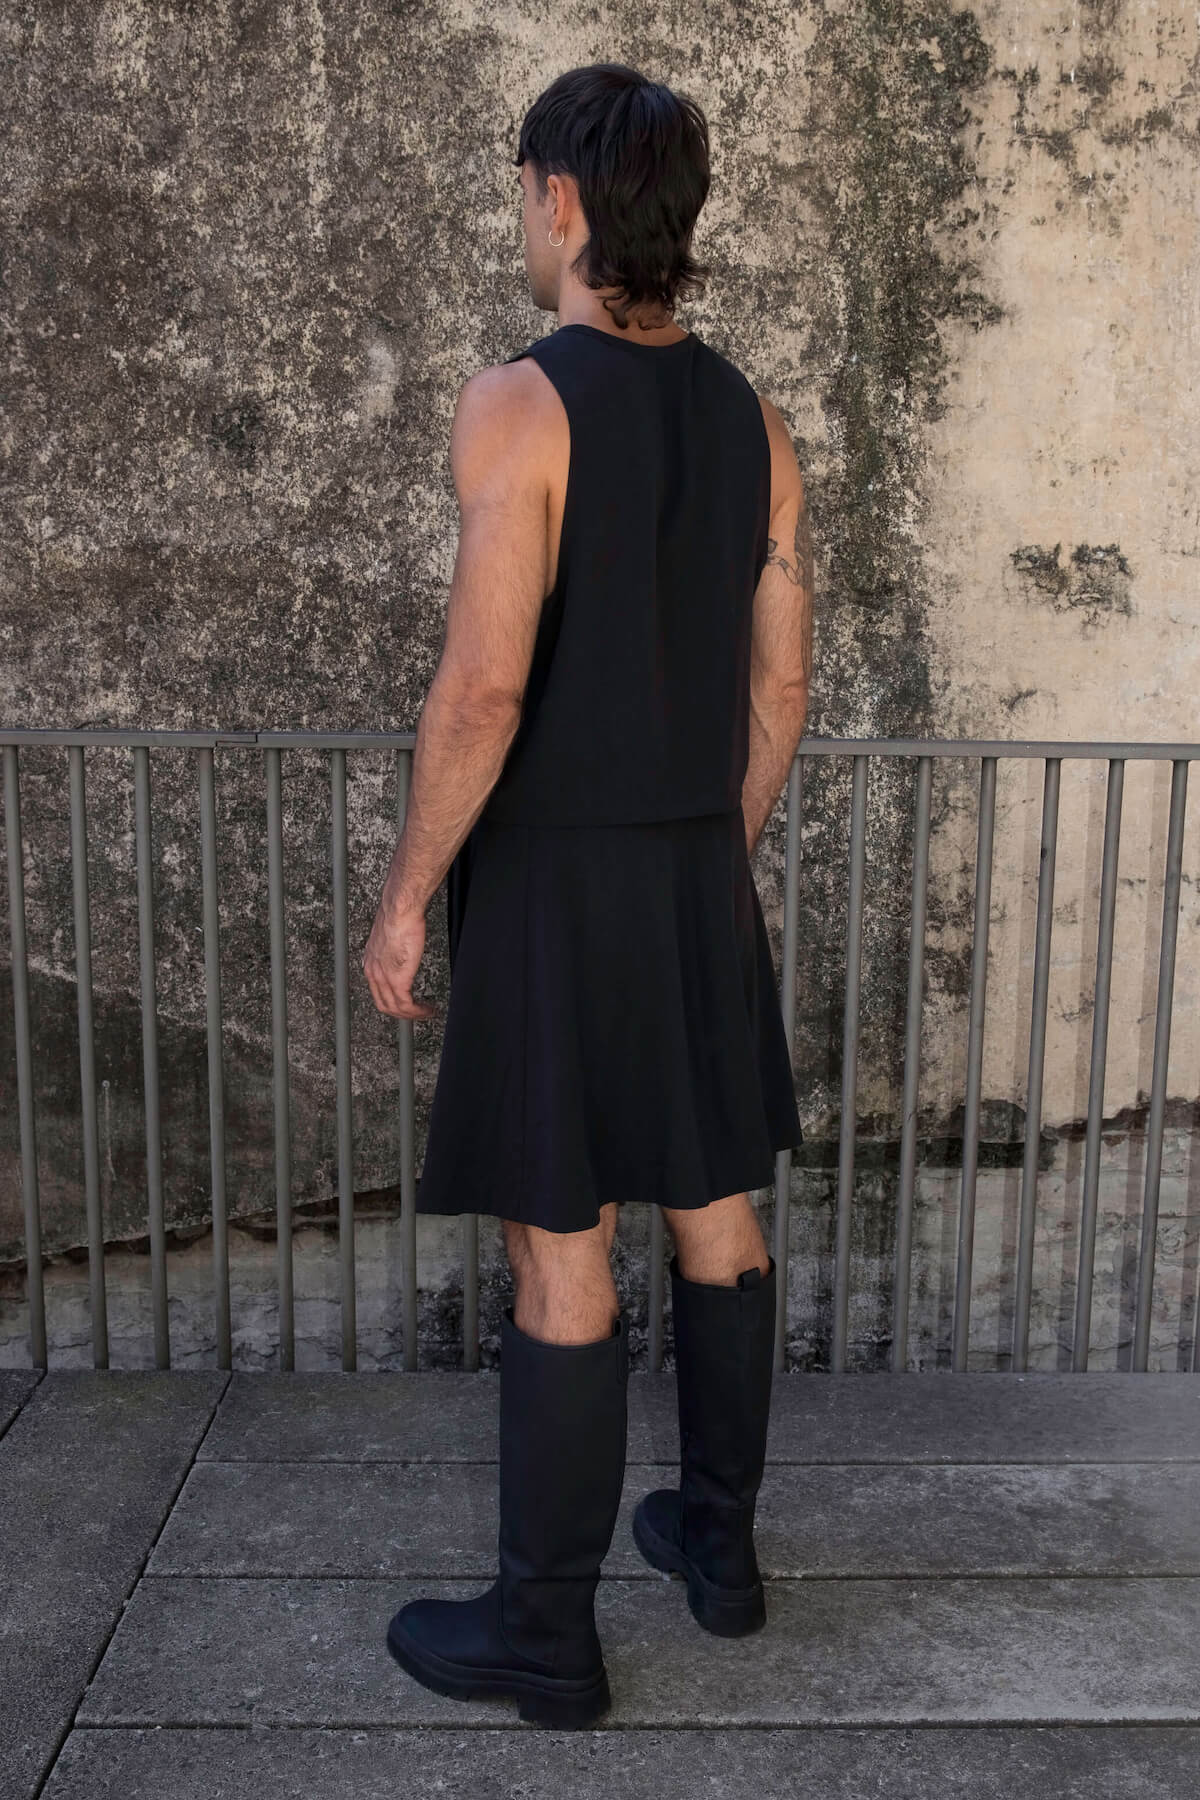 Cropped top for men and men's knee length shorts in black